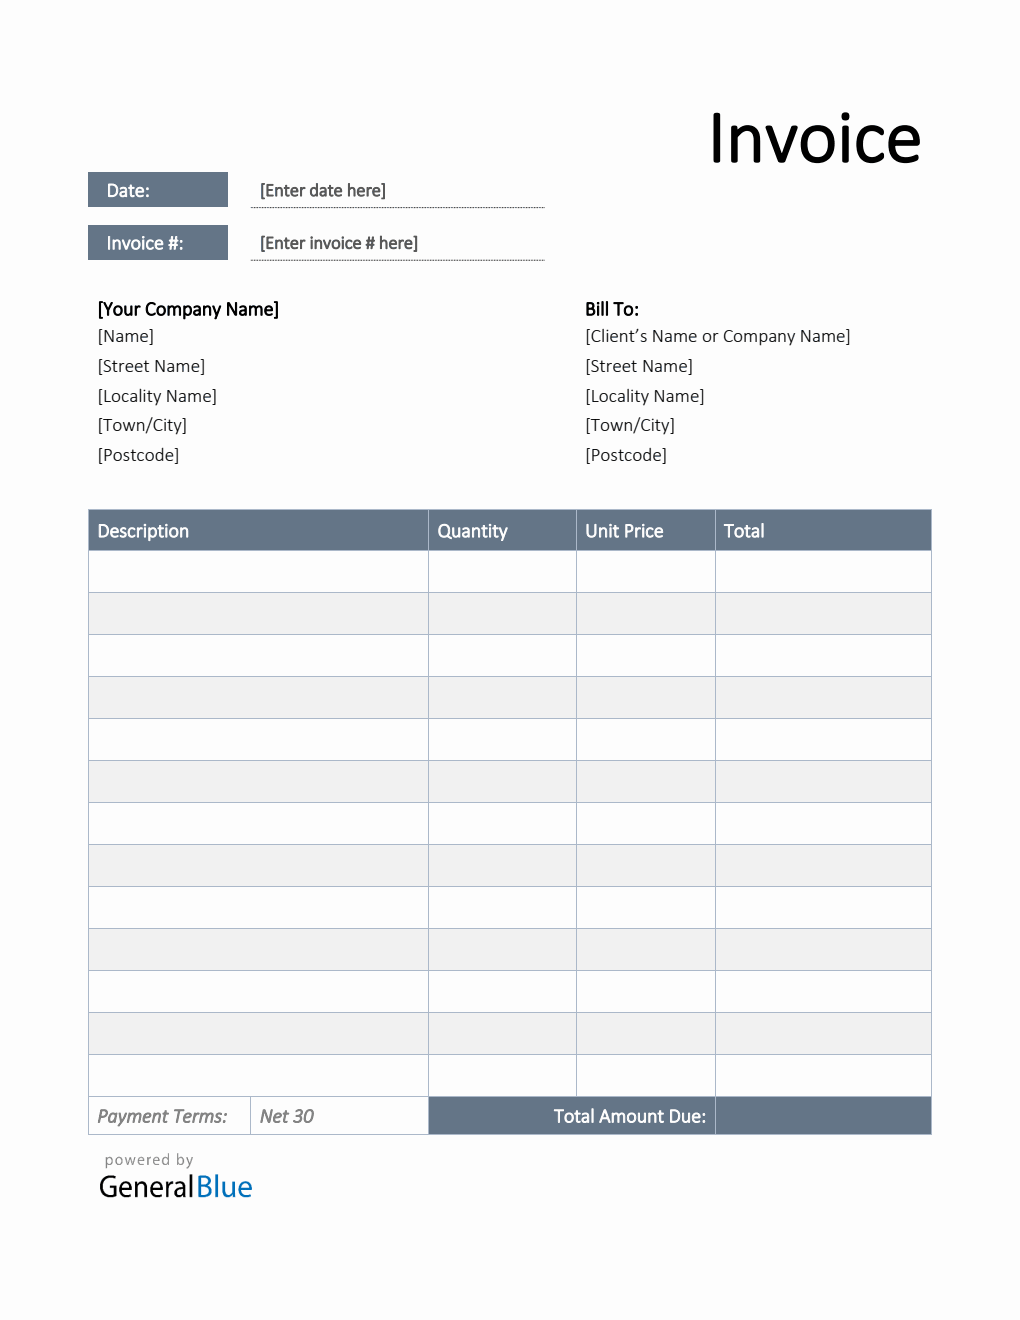 U.S. Invoice Template in Word (Simple)